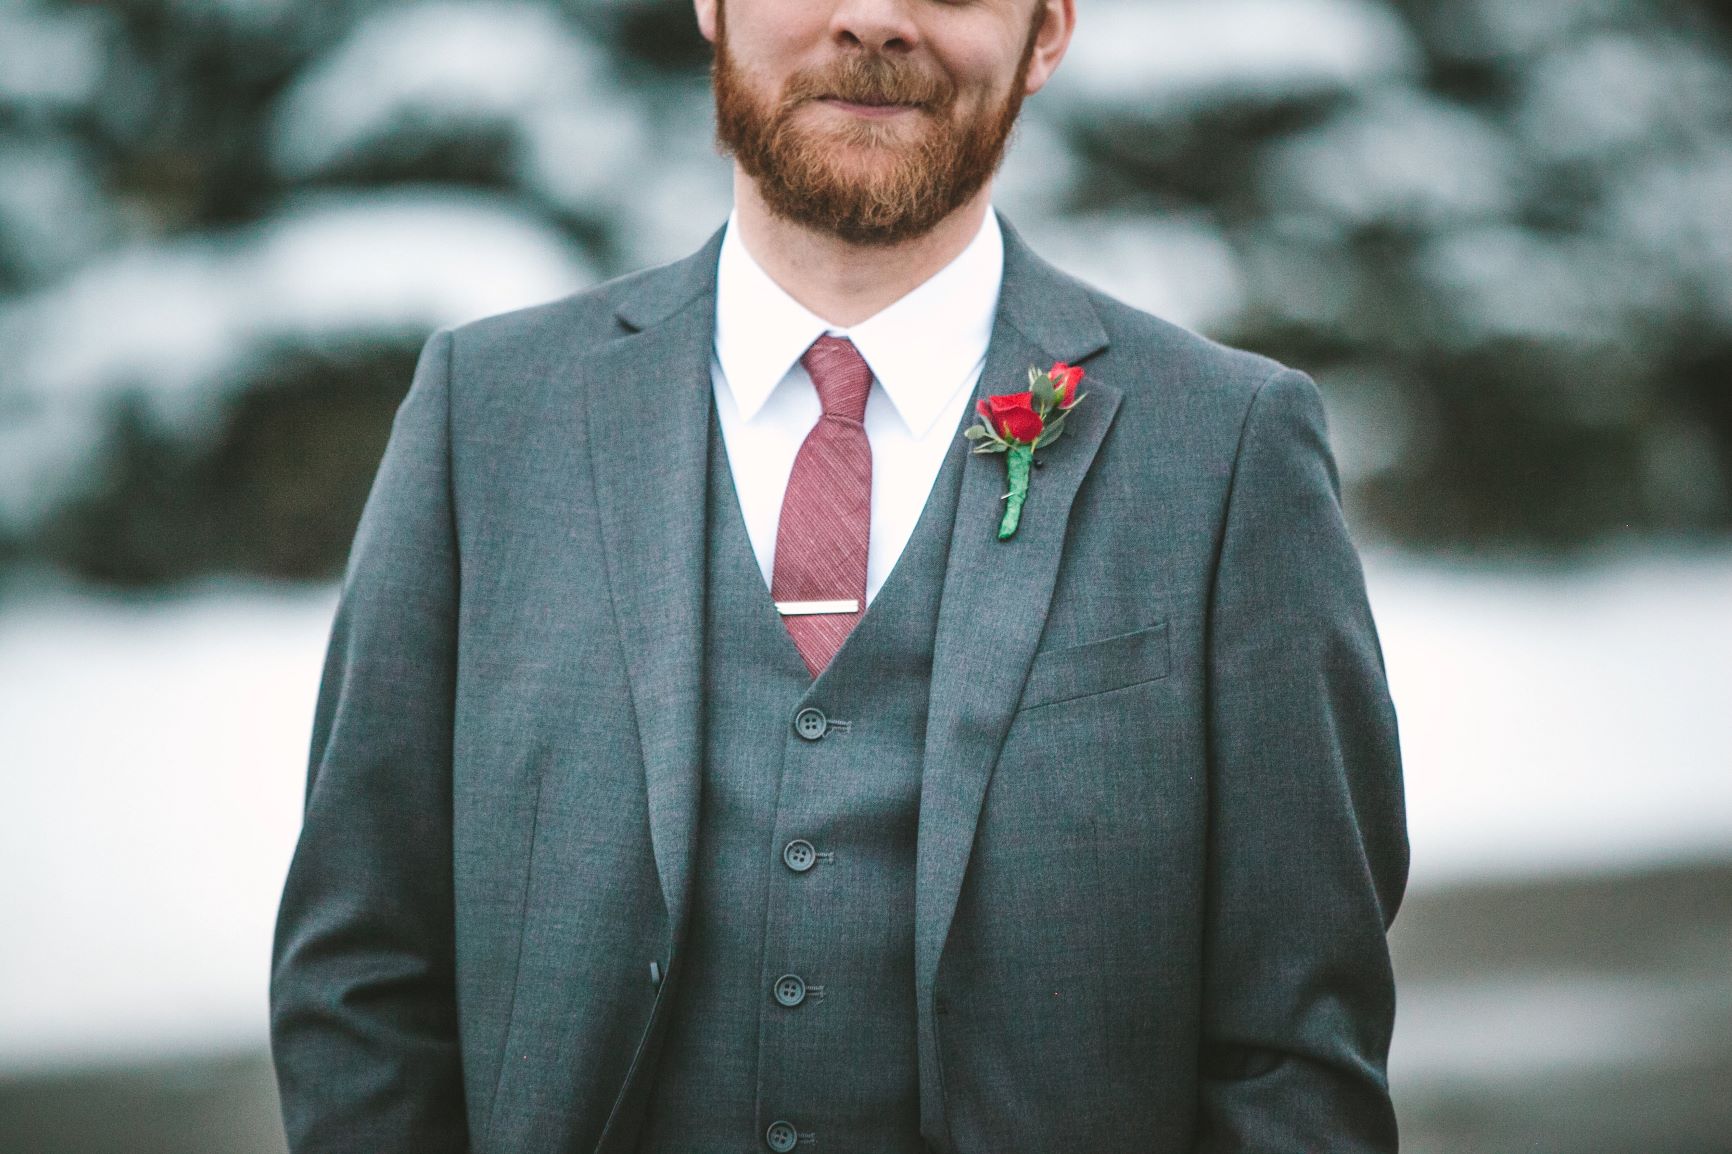 Winter Boutonnieres - Man with a simple red rose boutonniere